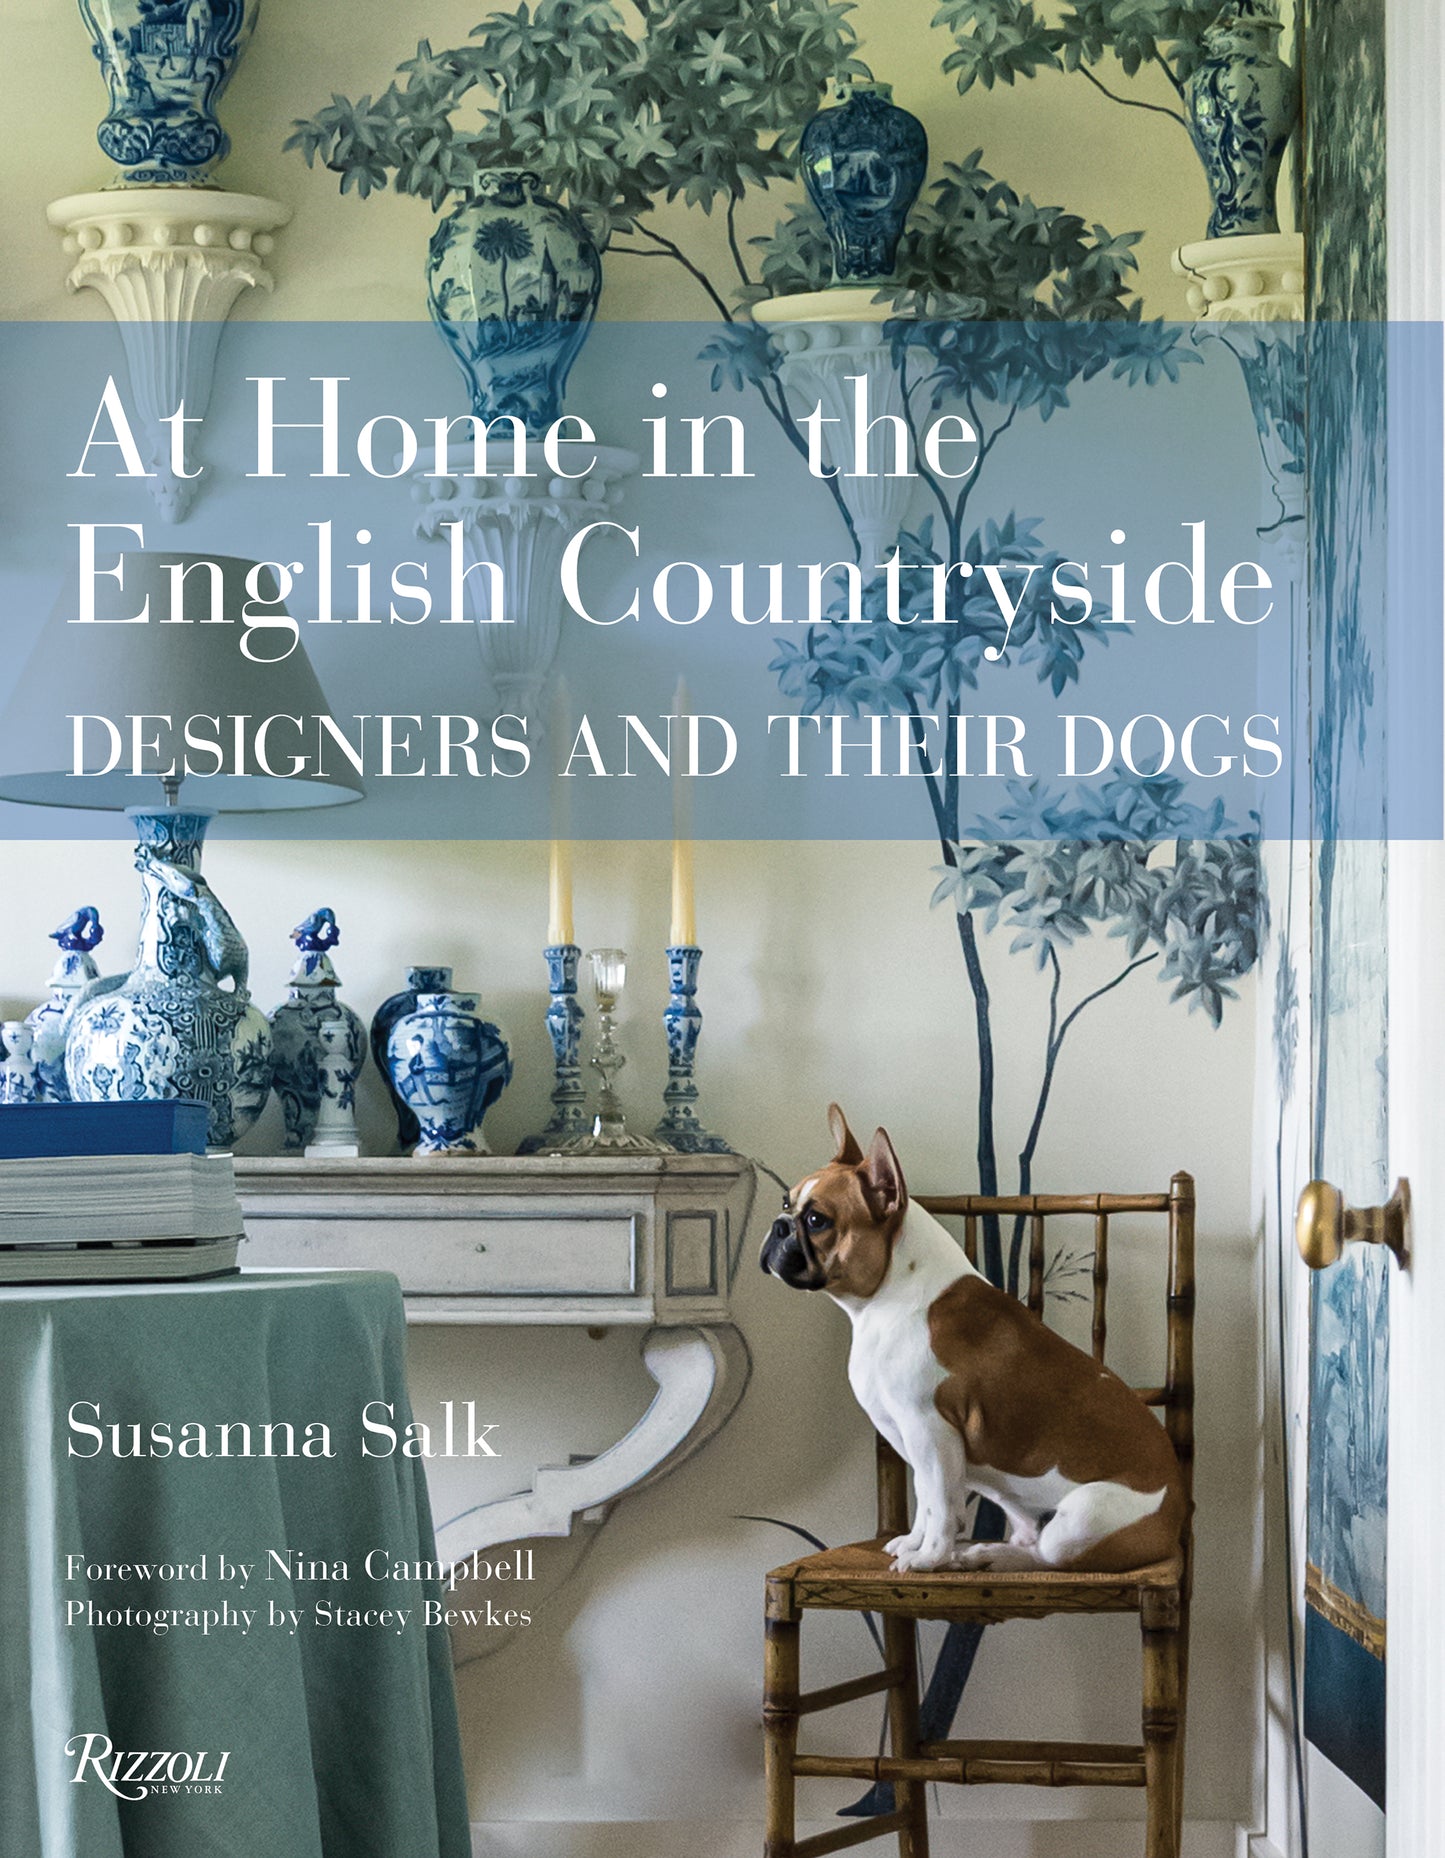 At Home in the English Countryside by Susanna Salk